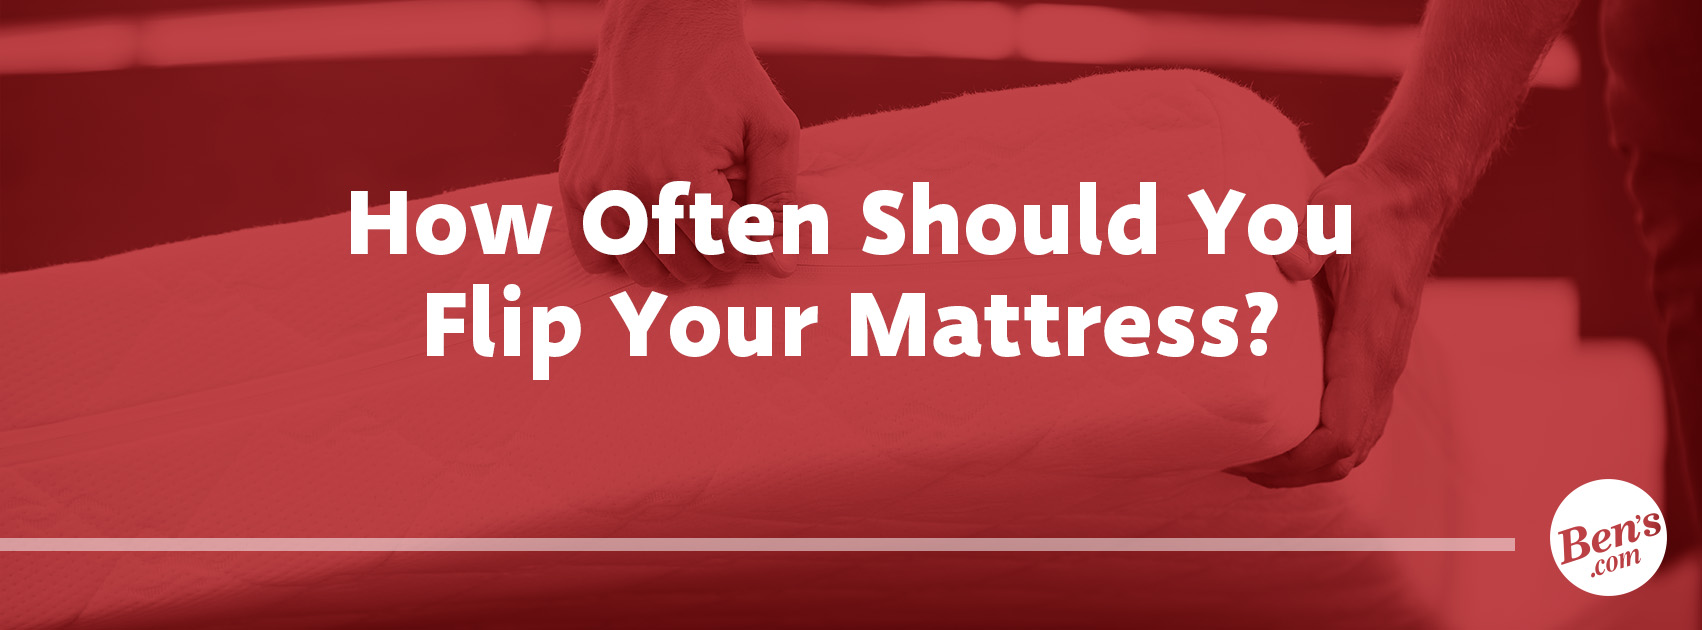 January (1) _ How Often Should You Flip Your Mattress